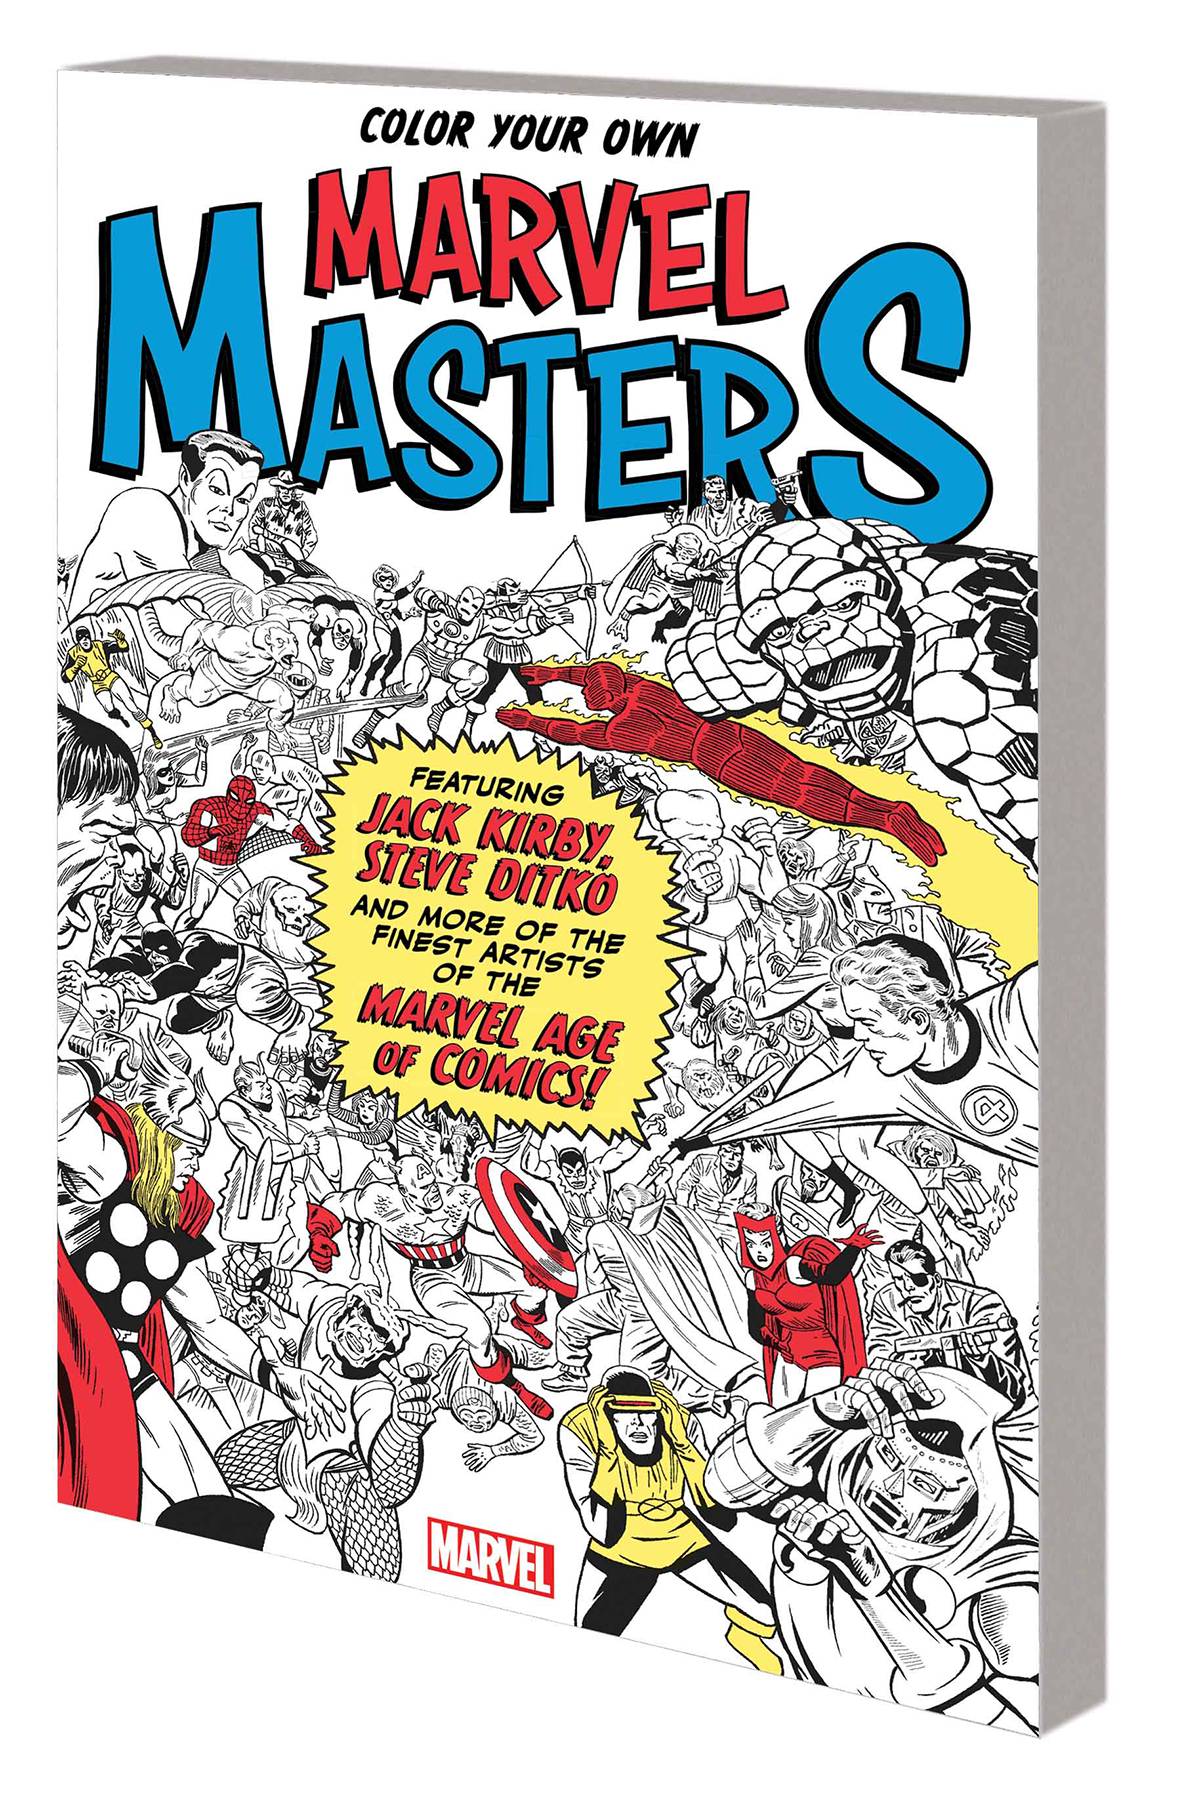 Color Your Own Marvel Masters Graphic Novel